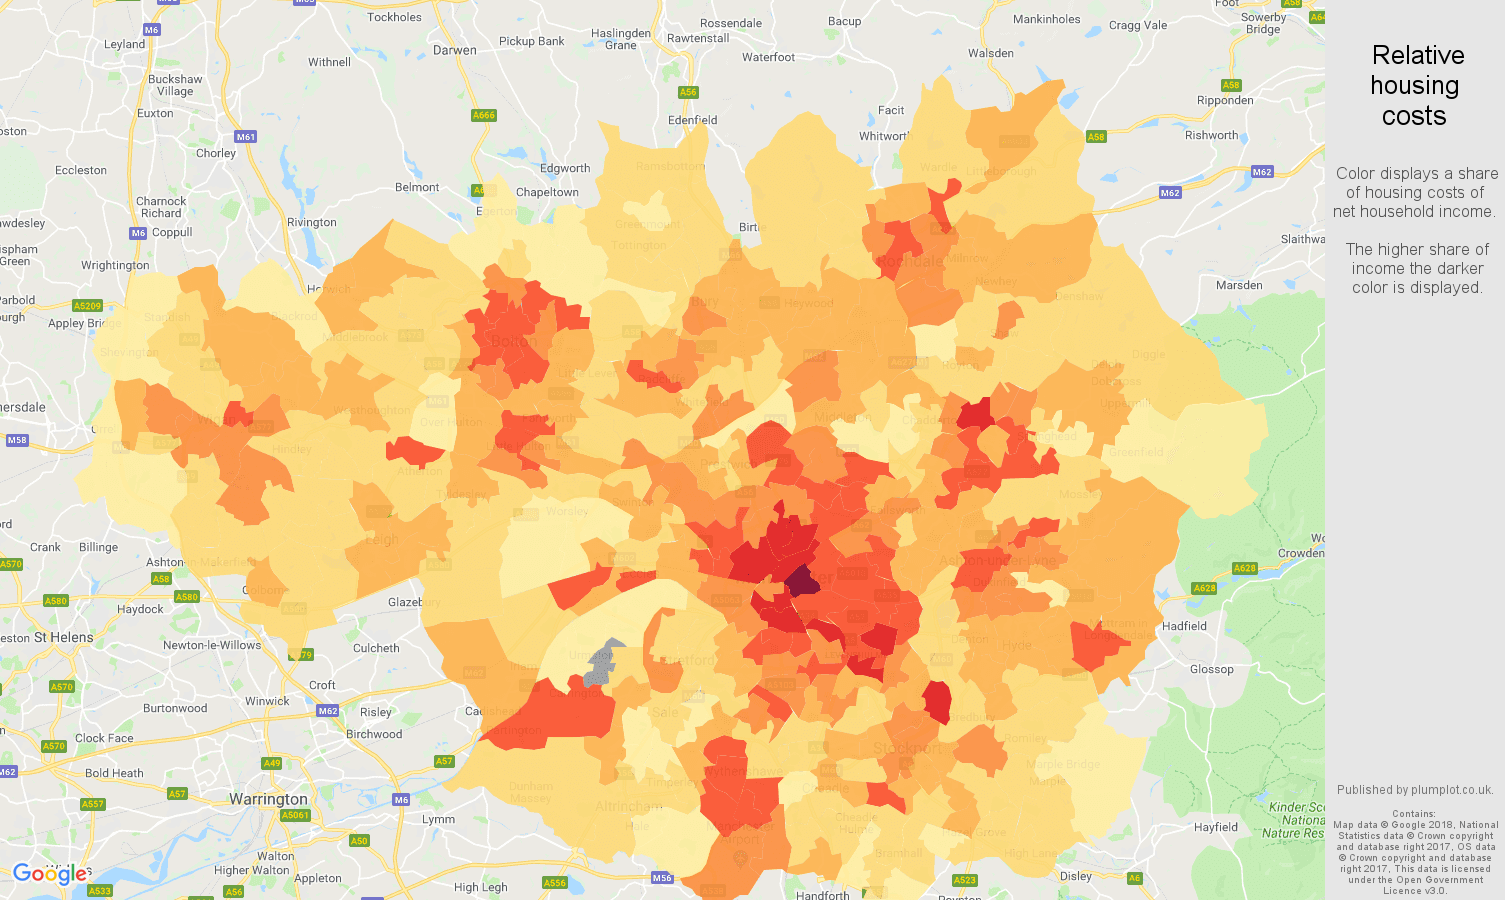 Greater Manchester relative housing costs map